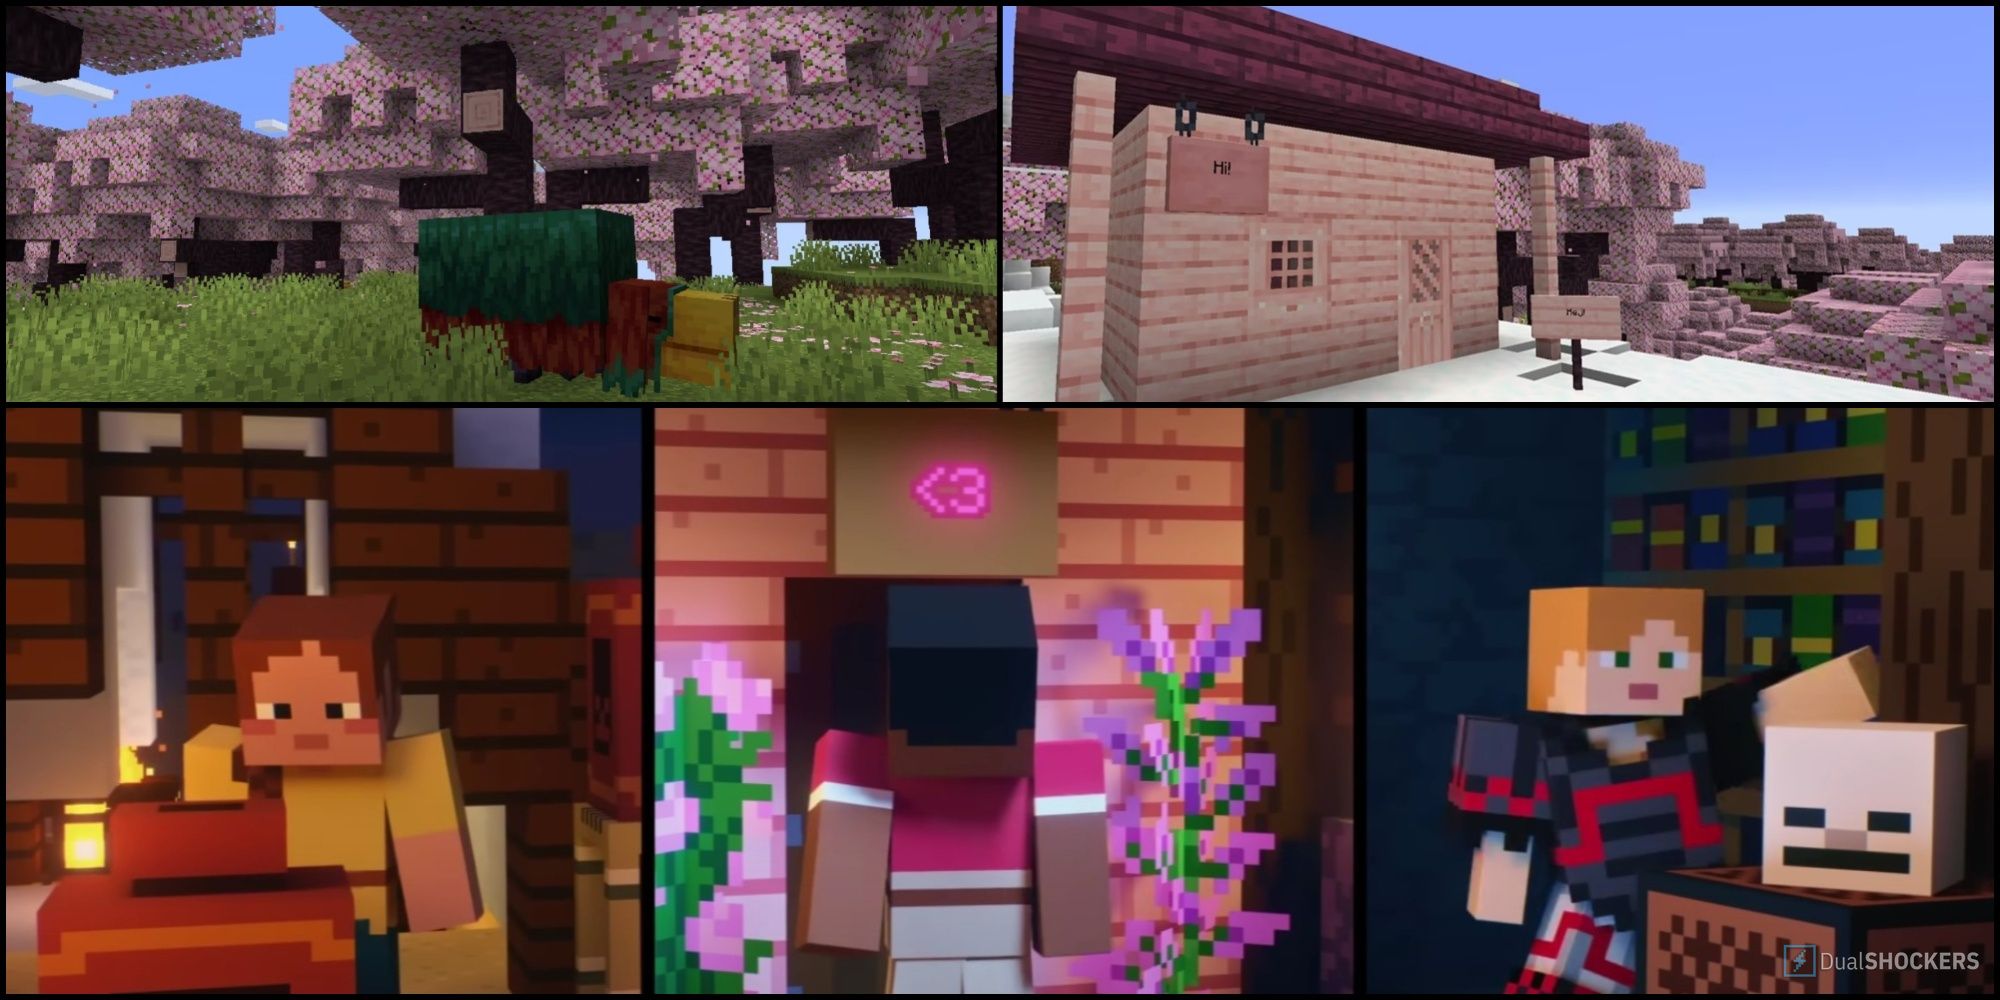 A sniffer, cherry wood,  and screenshot from the update trailer for Minecraft Trails and Tales update